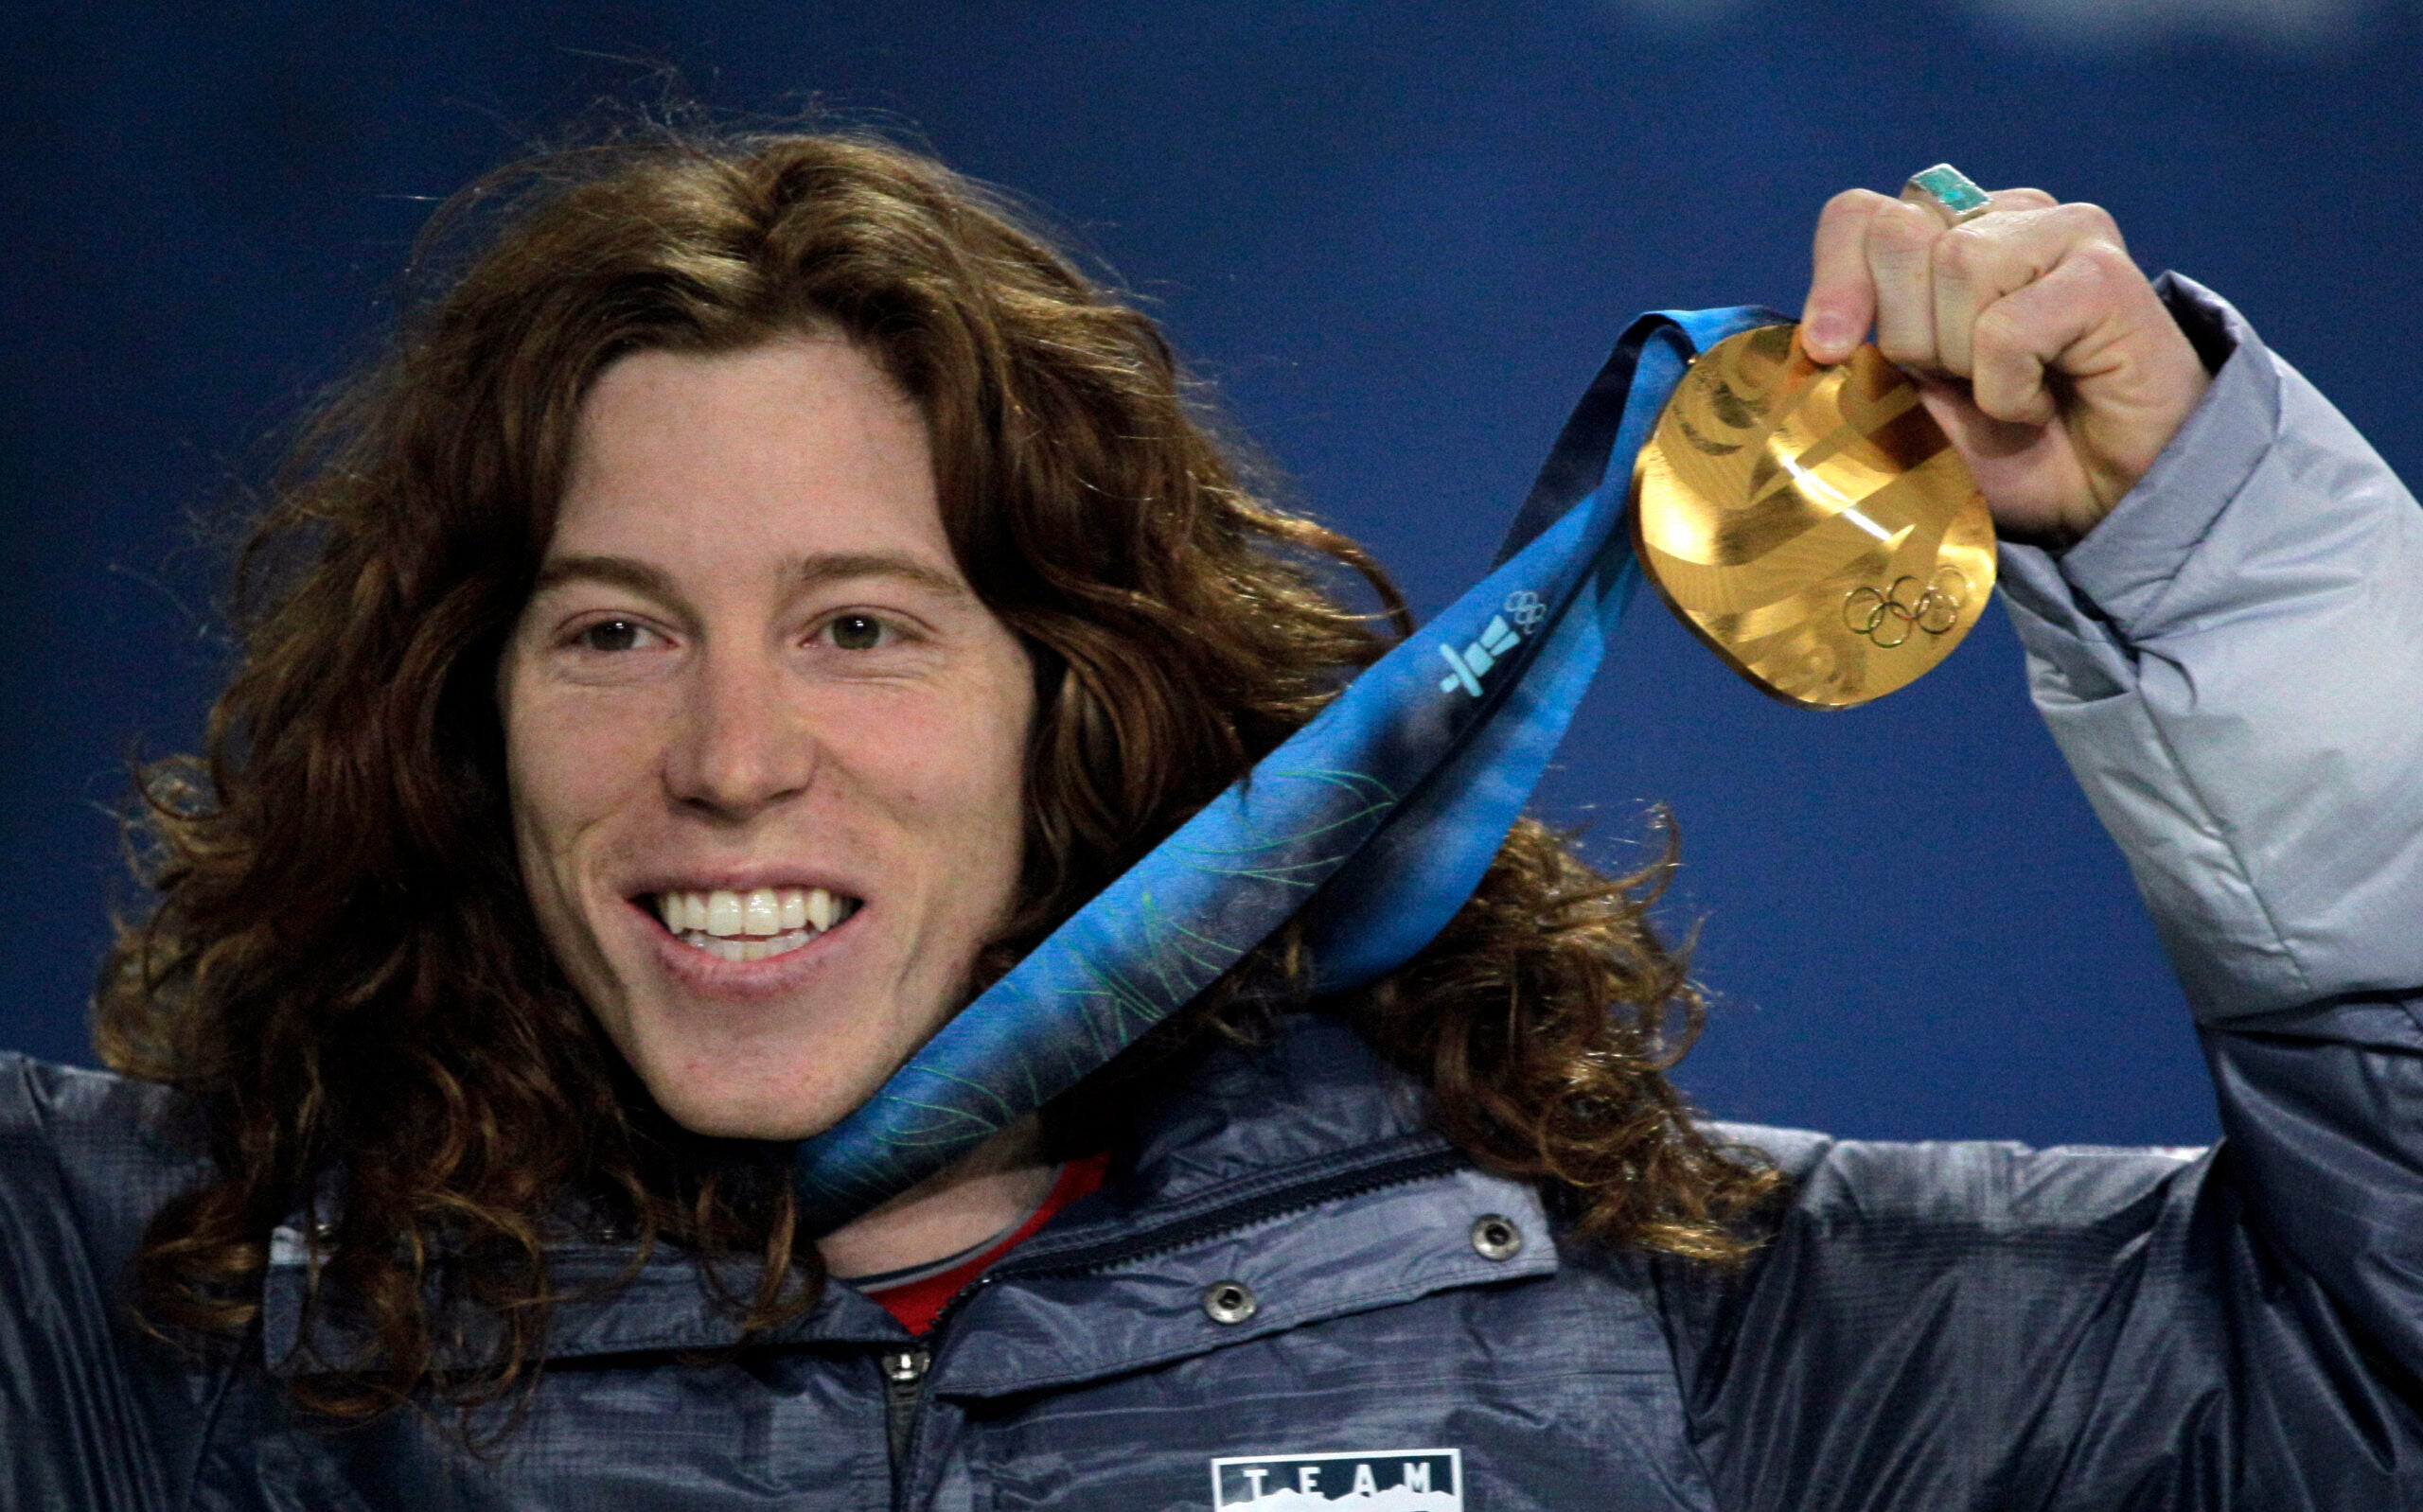 Shaun White, 35, says Beijing Olympics will be final competition